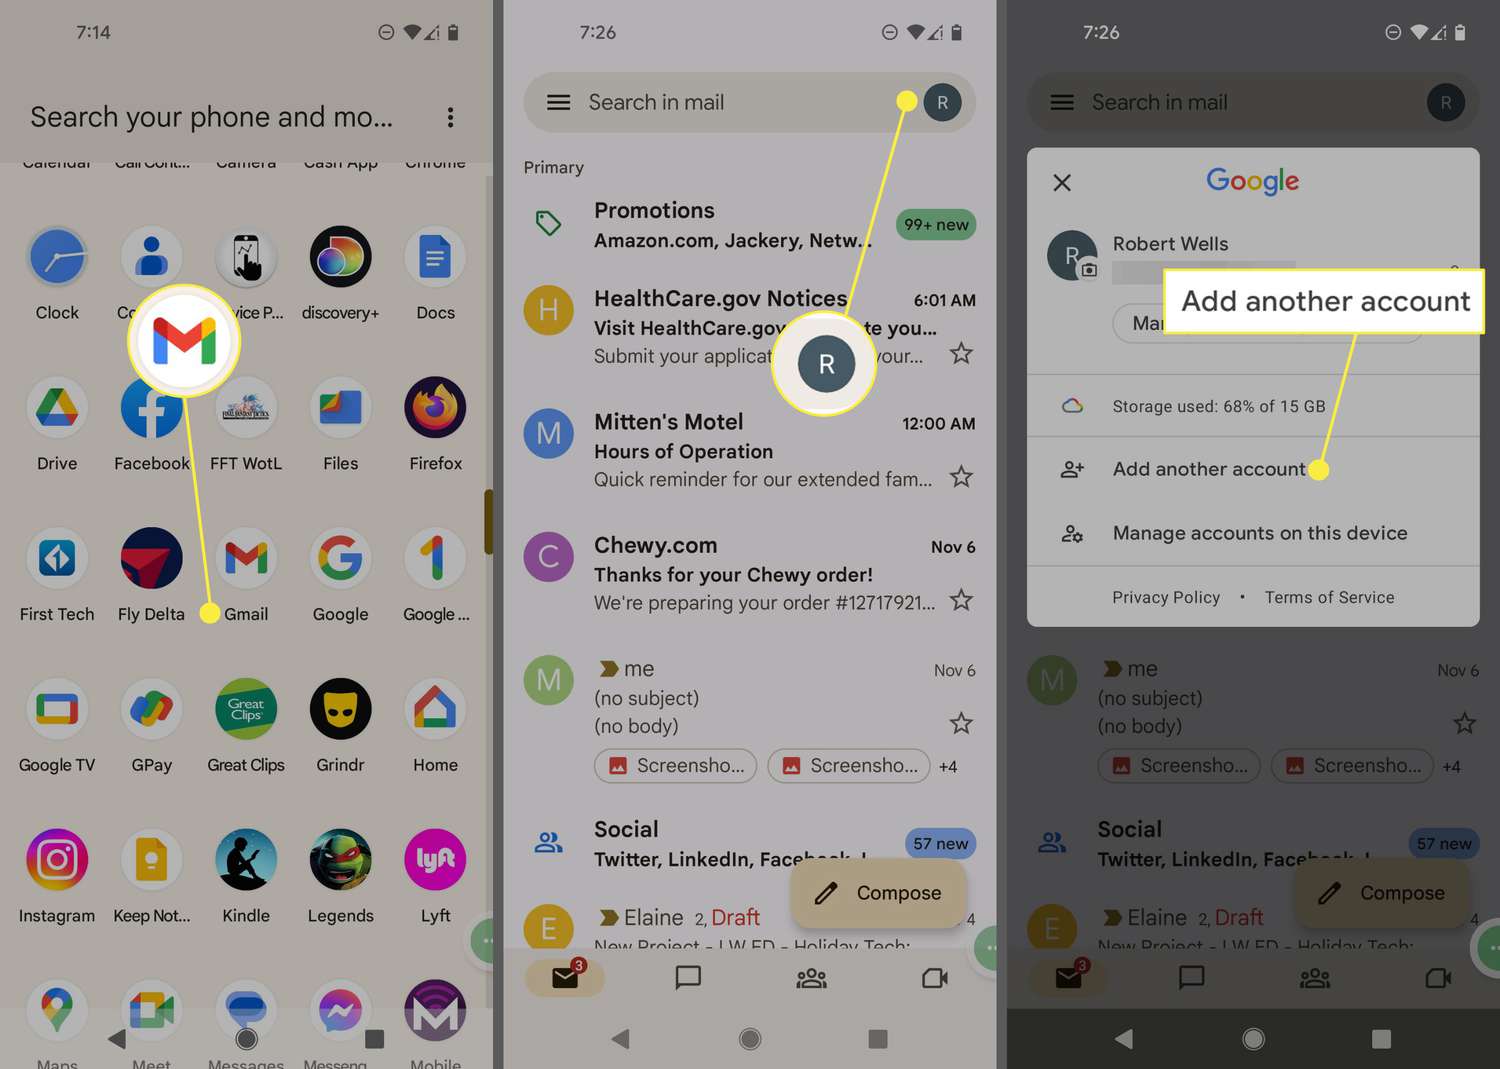 Gmail app, Profile icon, and Add another account on Android